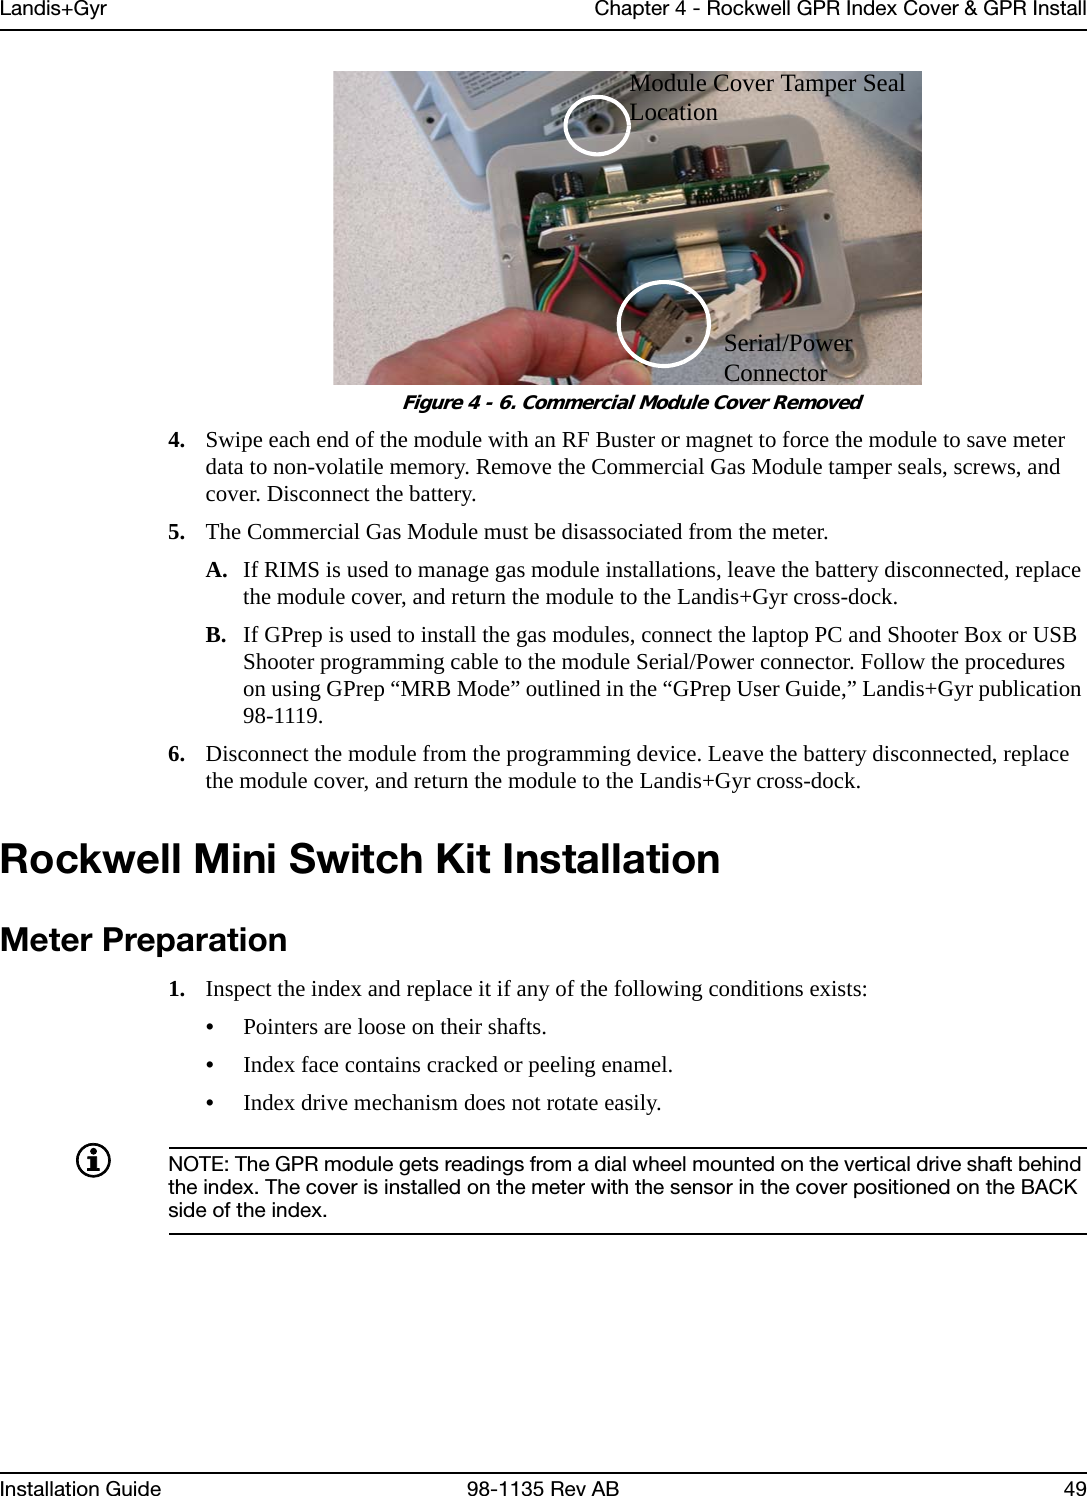 Landis+Gyr Chapter 4 - Rockwell GPR Index Cover &amp; GPR InstallInstallation Guide 98-1135 Rev AB 49 Figure 4 - 6. Commercial Module Cover Removed4. Swipe each end of the module with an RF Buster or magnet to force the module to save meter data to non-volatile memory. Remove the Commercial Gas Module tamper seals, screws, and cover. Disconnect the battery.5. The Commercial Gas Module must be disassociated from the meter.A. If RIMS is used to manage gas module installations, leave the battery disconnected, replace the module cover, and return the module to the Landis+Gyr cross-dock.B. If GPrep is used to install the gas modules, connect the laptop PC and Shooter Box or USB Shooter programming cable to the module Serial/Power connector. Follow the procedures on using GPrep “MRB Mode” outlined in the “GPrep User Guide,” Landis+Gyr publication 98-1119.6. Disconnect the module from the programming device. Leave the battery disconnected, replace the module cover, and return the module to the Landis+Gyr cross-dock.Rockwell Mini Switch Kit InstallationMeter Preparation1. Inspect the index and replace it if any of the following conditions exists:•Pointers are loose on their shafts.•Index face contains cracked or peeling enamel.•Index drive mechanism does not rotate easily.NOTE: The GPR module gets readings from a dial wheel mounted on the vertical drive shaft behind the index. The cover is installed on the meter with the sensor in the cover positioned on the BACK side of the index.Module Cover Tamper Seal LocationSerial/Power Connector